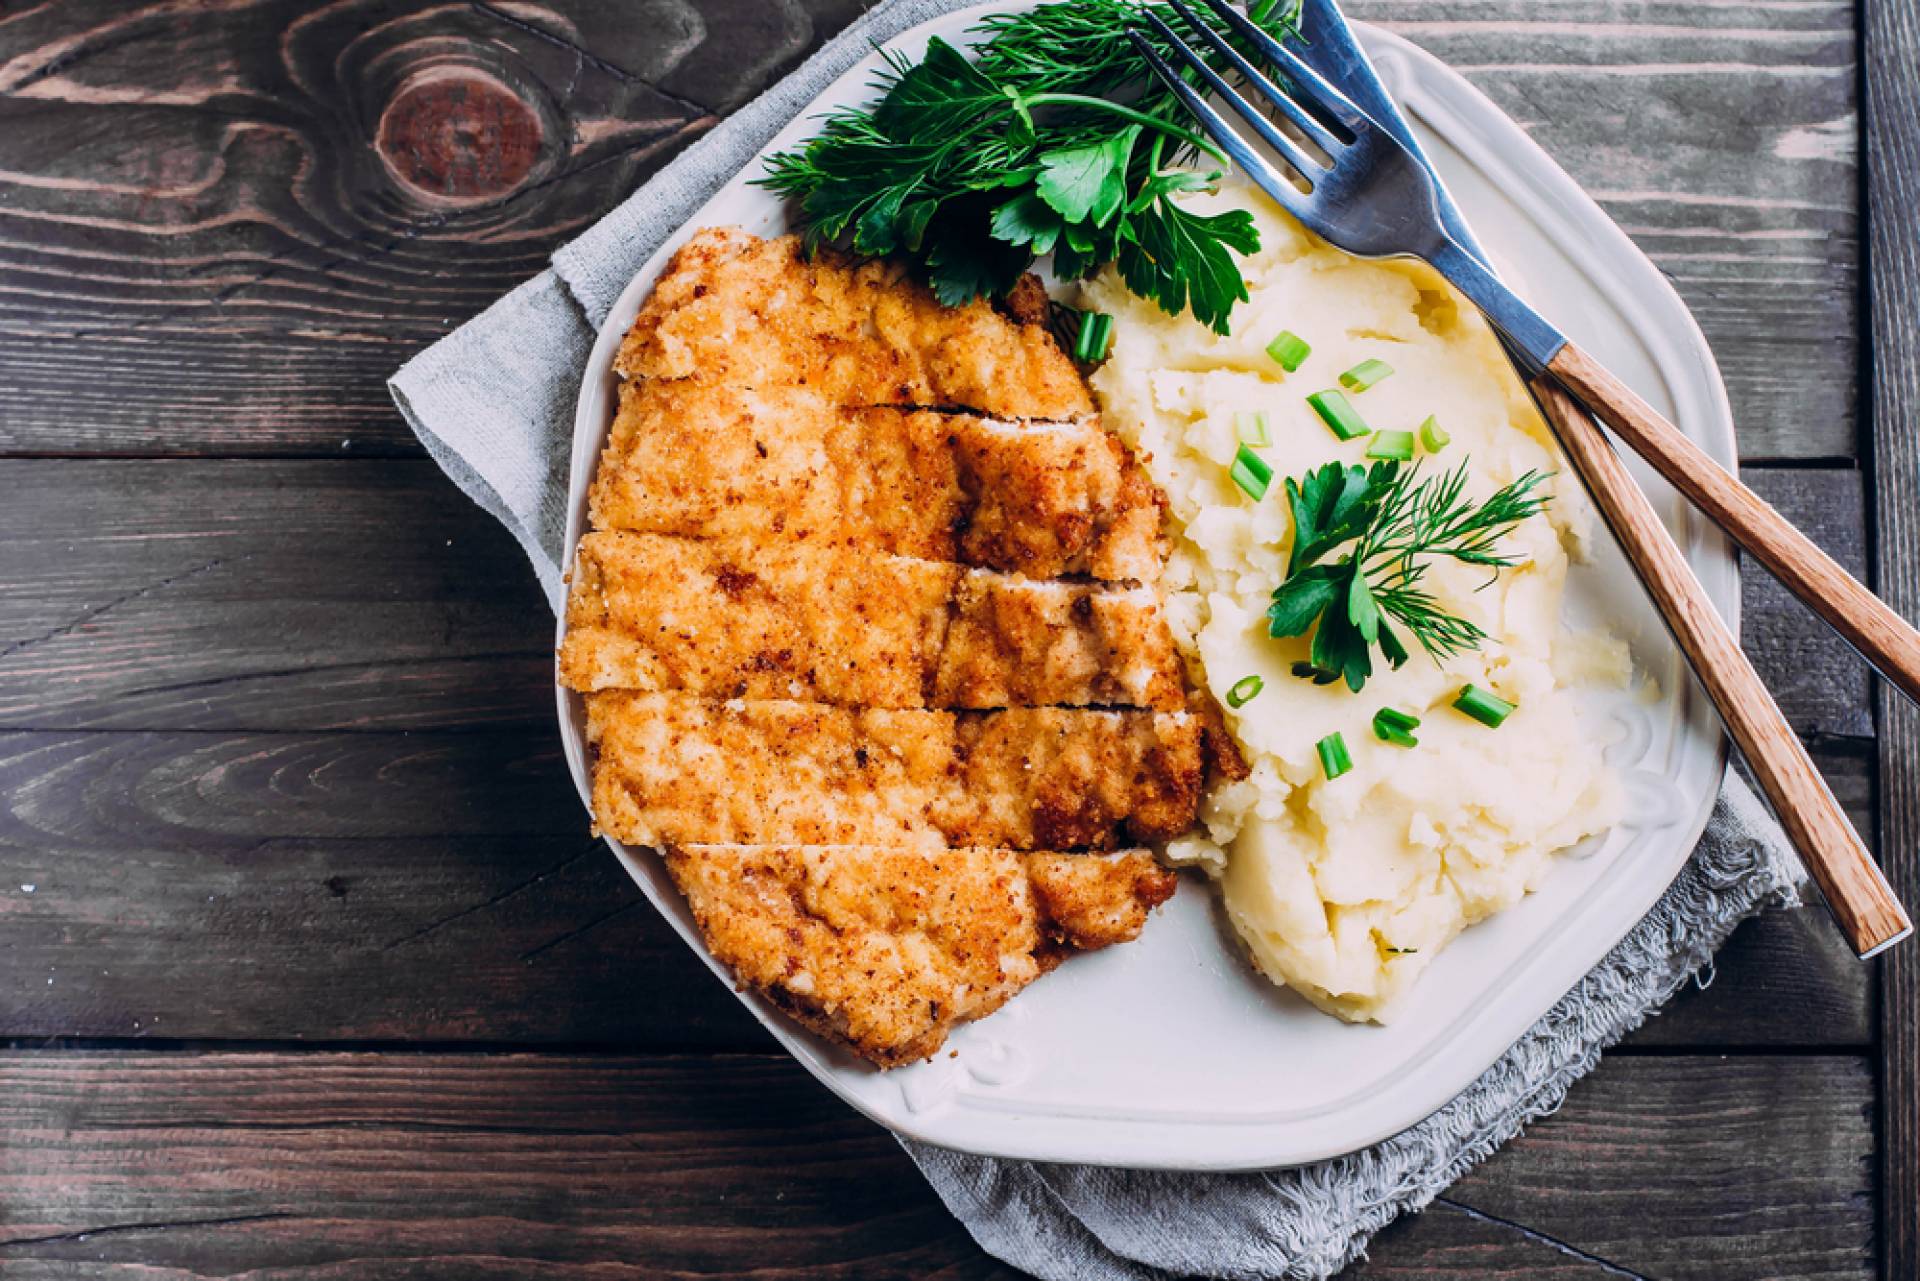 Whole30 Pork Schnitzel with Mashed Potatoes